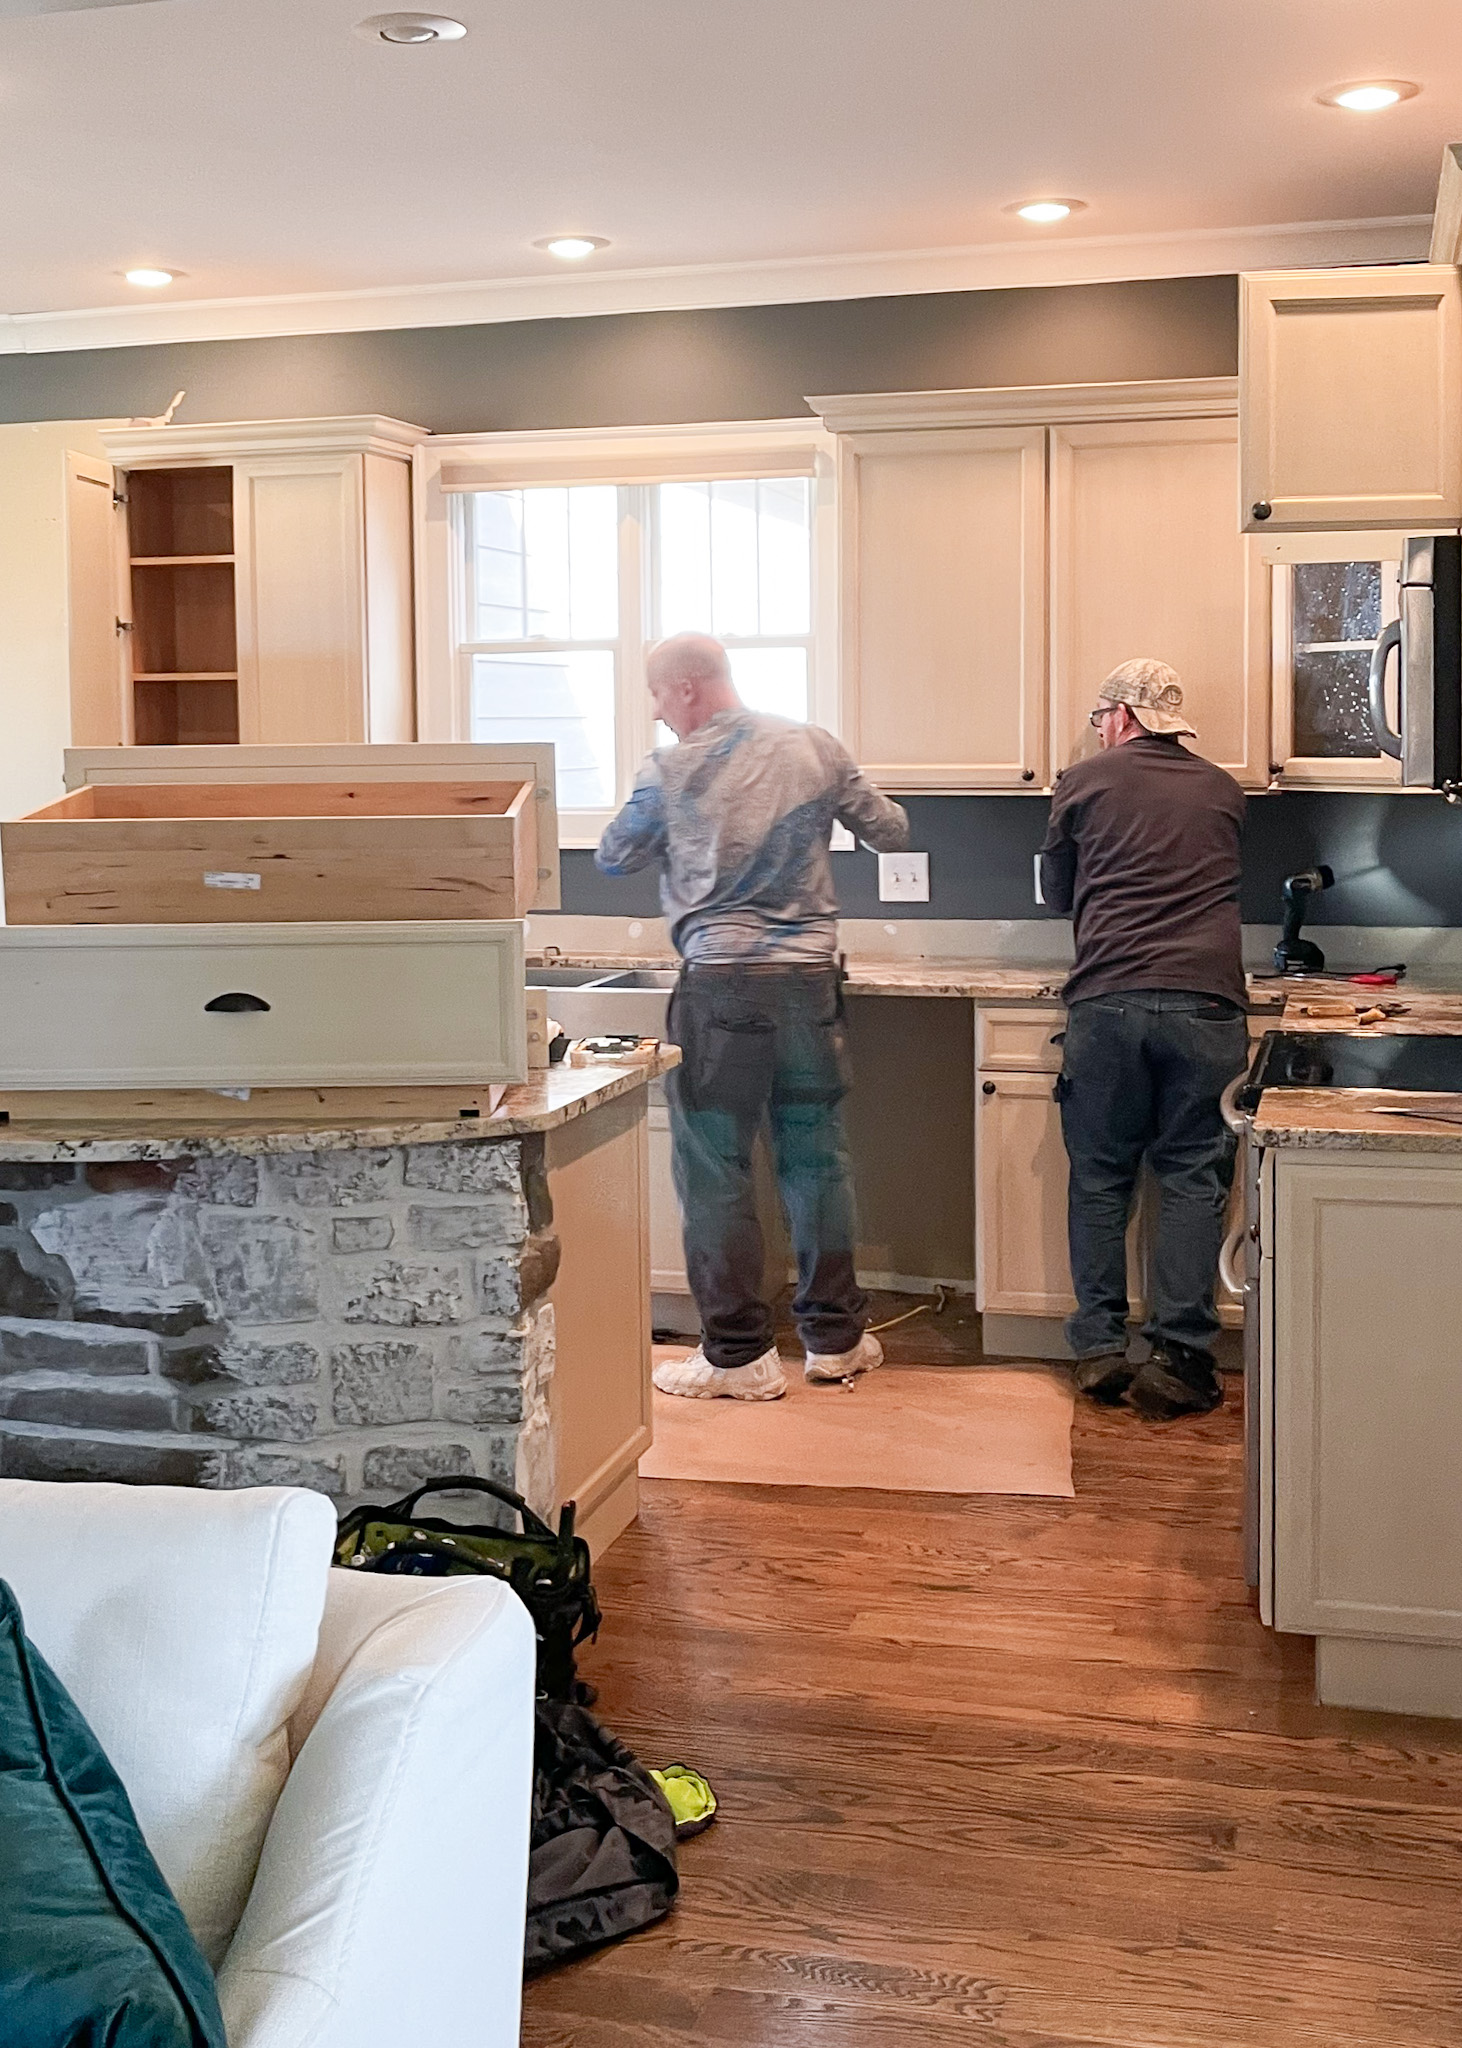 workers remodeling kitchen
